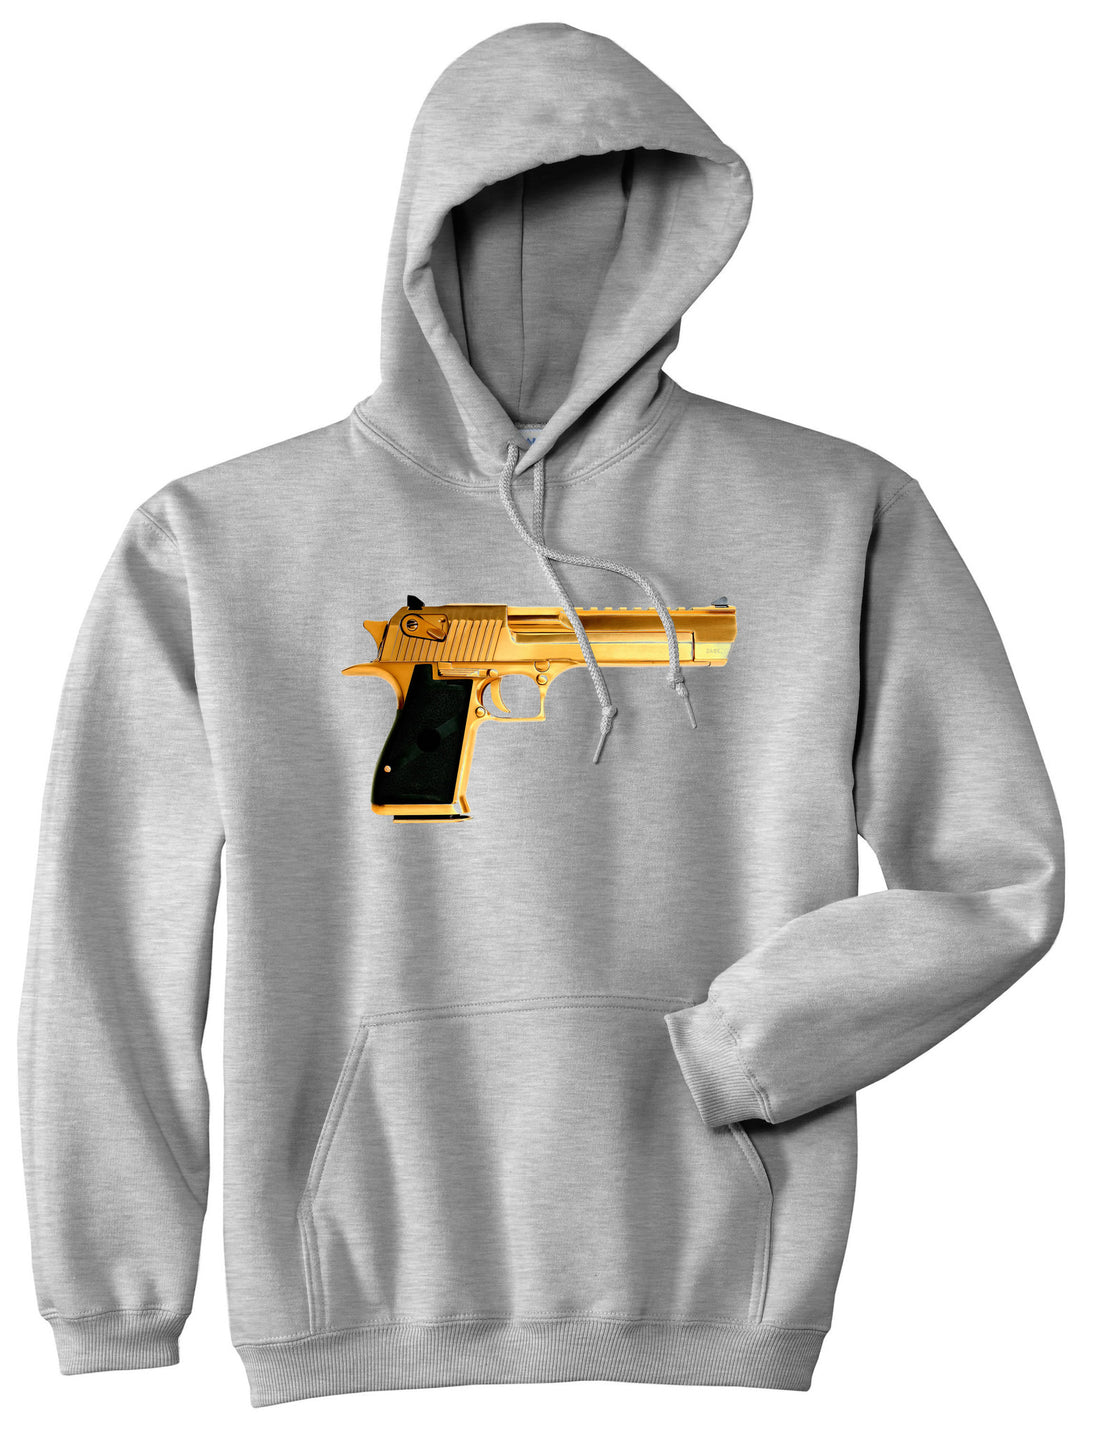 Gold Gun 9mm Revolver Chrome 45 Boys Kids Pullover Hoodie Hoody In Grey by Kings Of NY